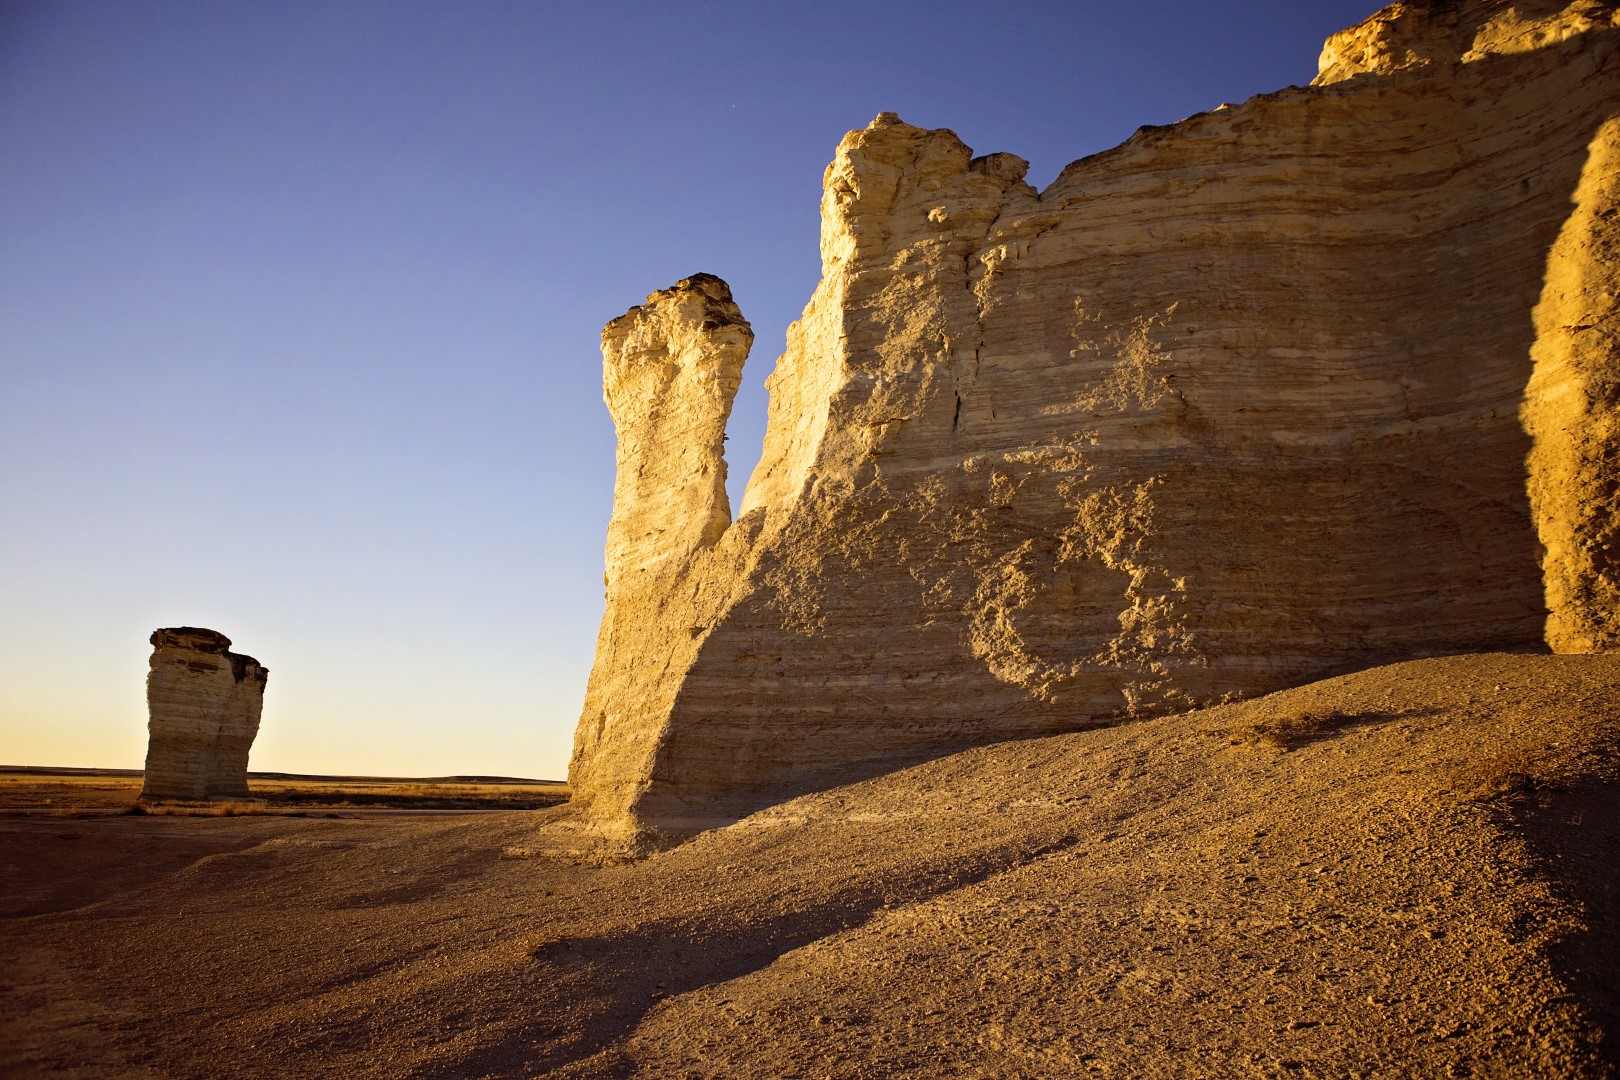 Sunset at Monument Rocks in Gove County Kansas